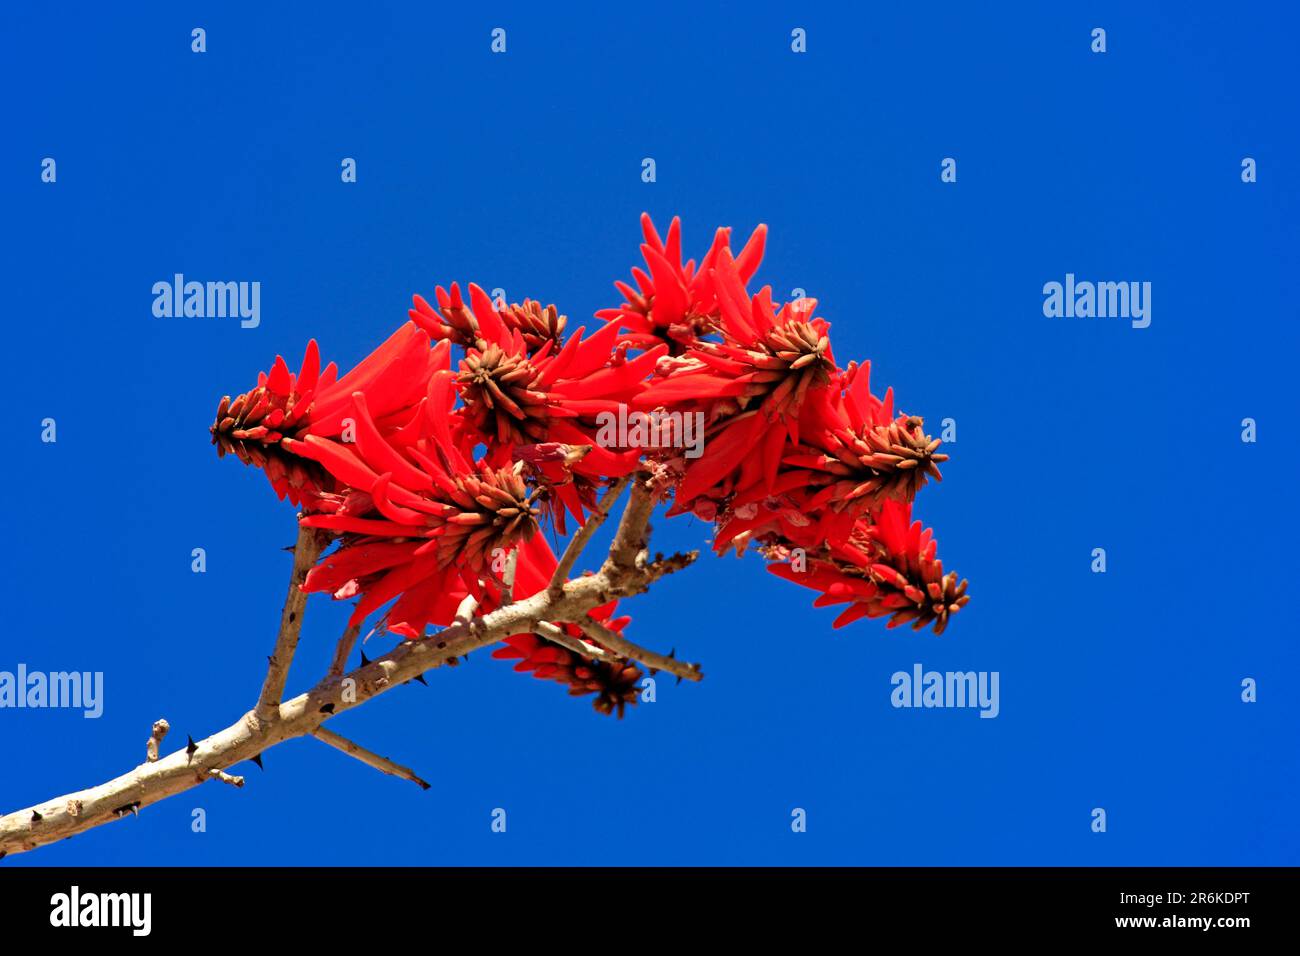 Flame coral tree, Western Cape, South Africa (Erythrina coralloides) Stock Photo